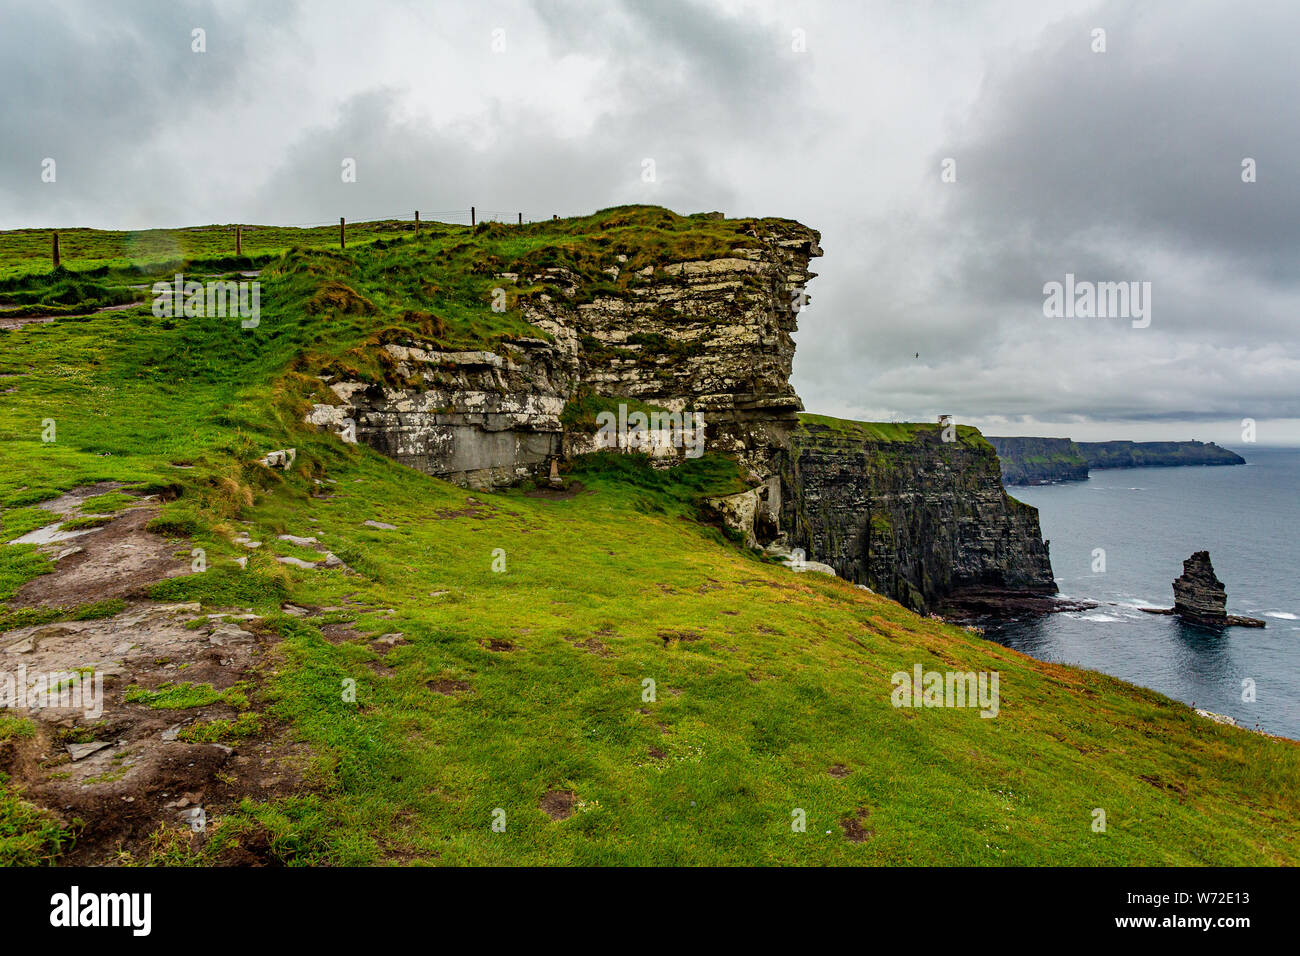 Countryside landscape in the Cliffs of Moher with the Branaunmore sea stack, geosites and geopark, Wild Atlantic Way, wonderful cloudy spring day Stock Photo